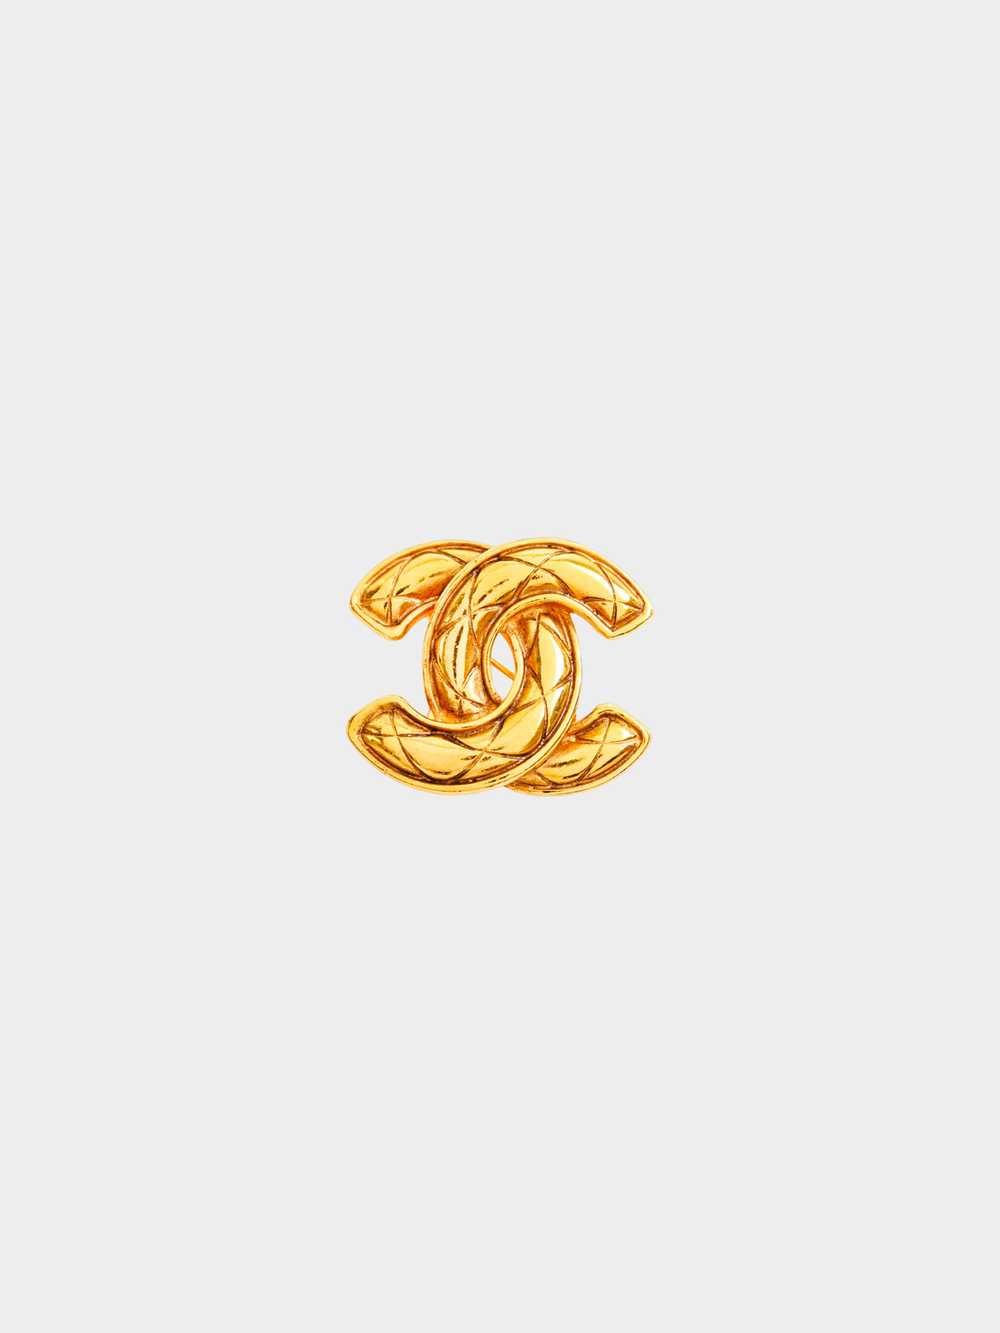 Chanel 1980s Vintage Gold Quilted Brooch - image 1